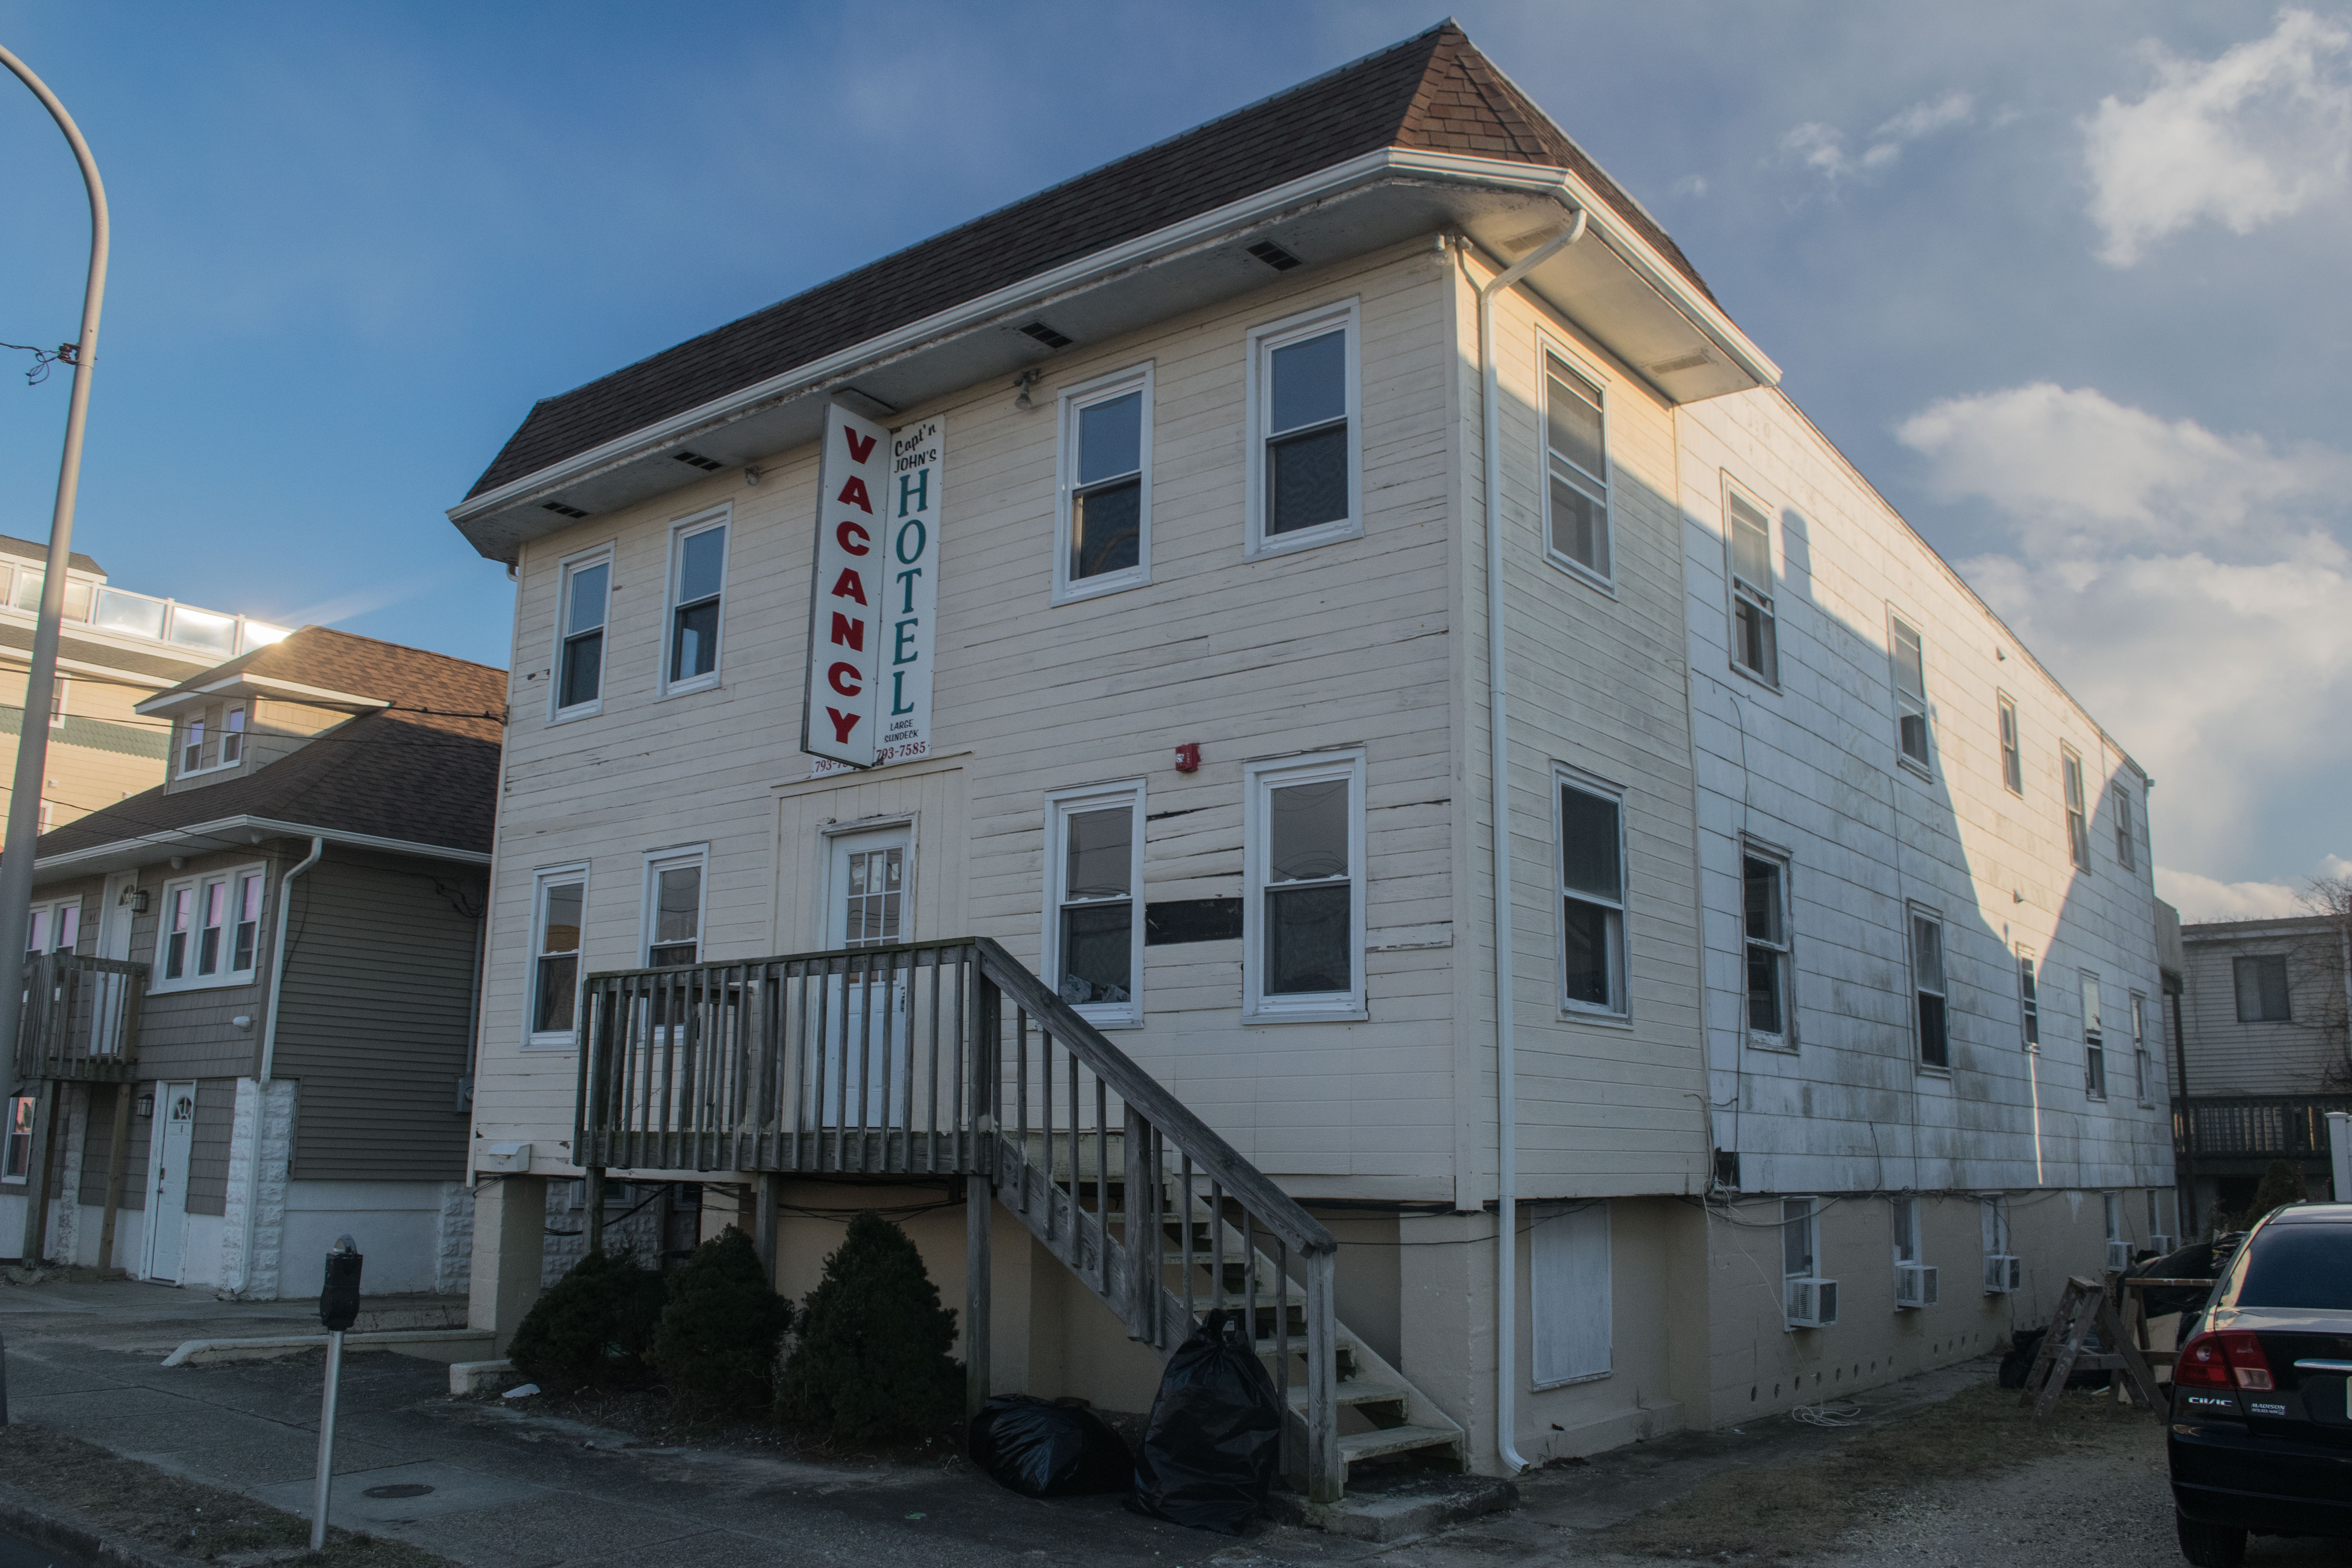 24 Room Seaside Heights Boarding House To Be Converted To